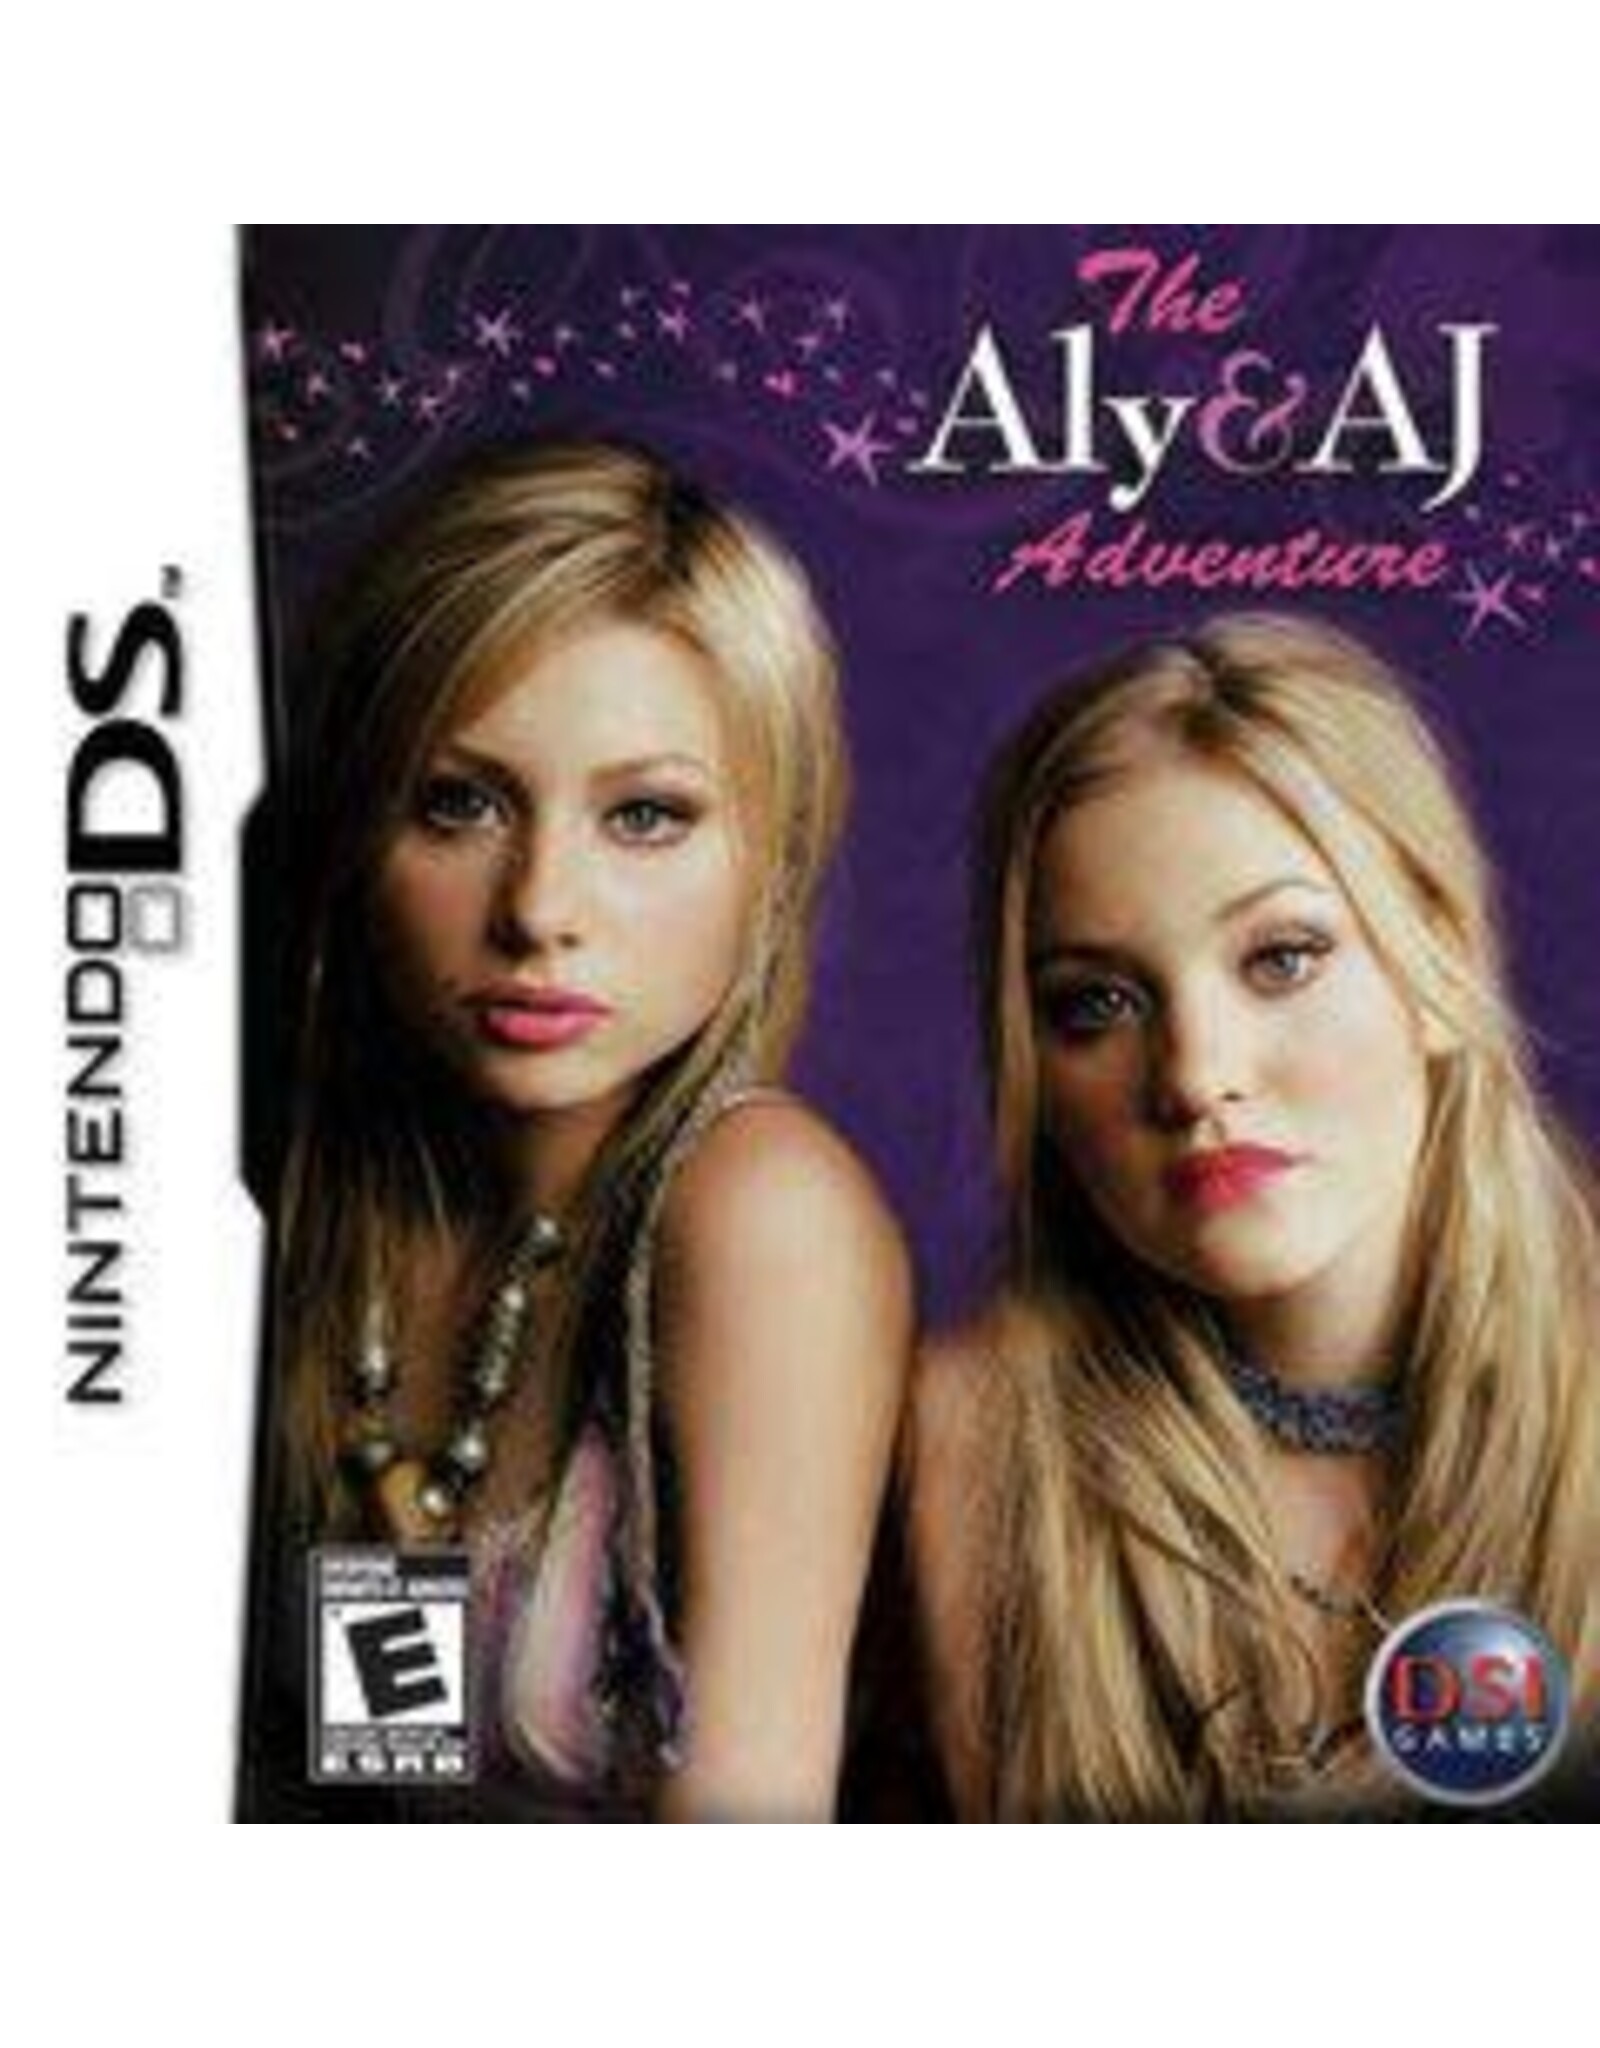 Nintendo DS Aly & AJ Adventure, The (Cart Only)